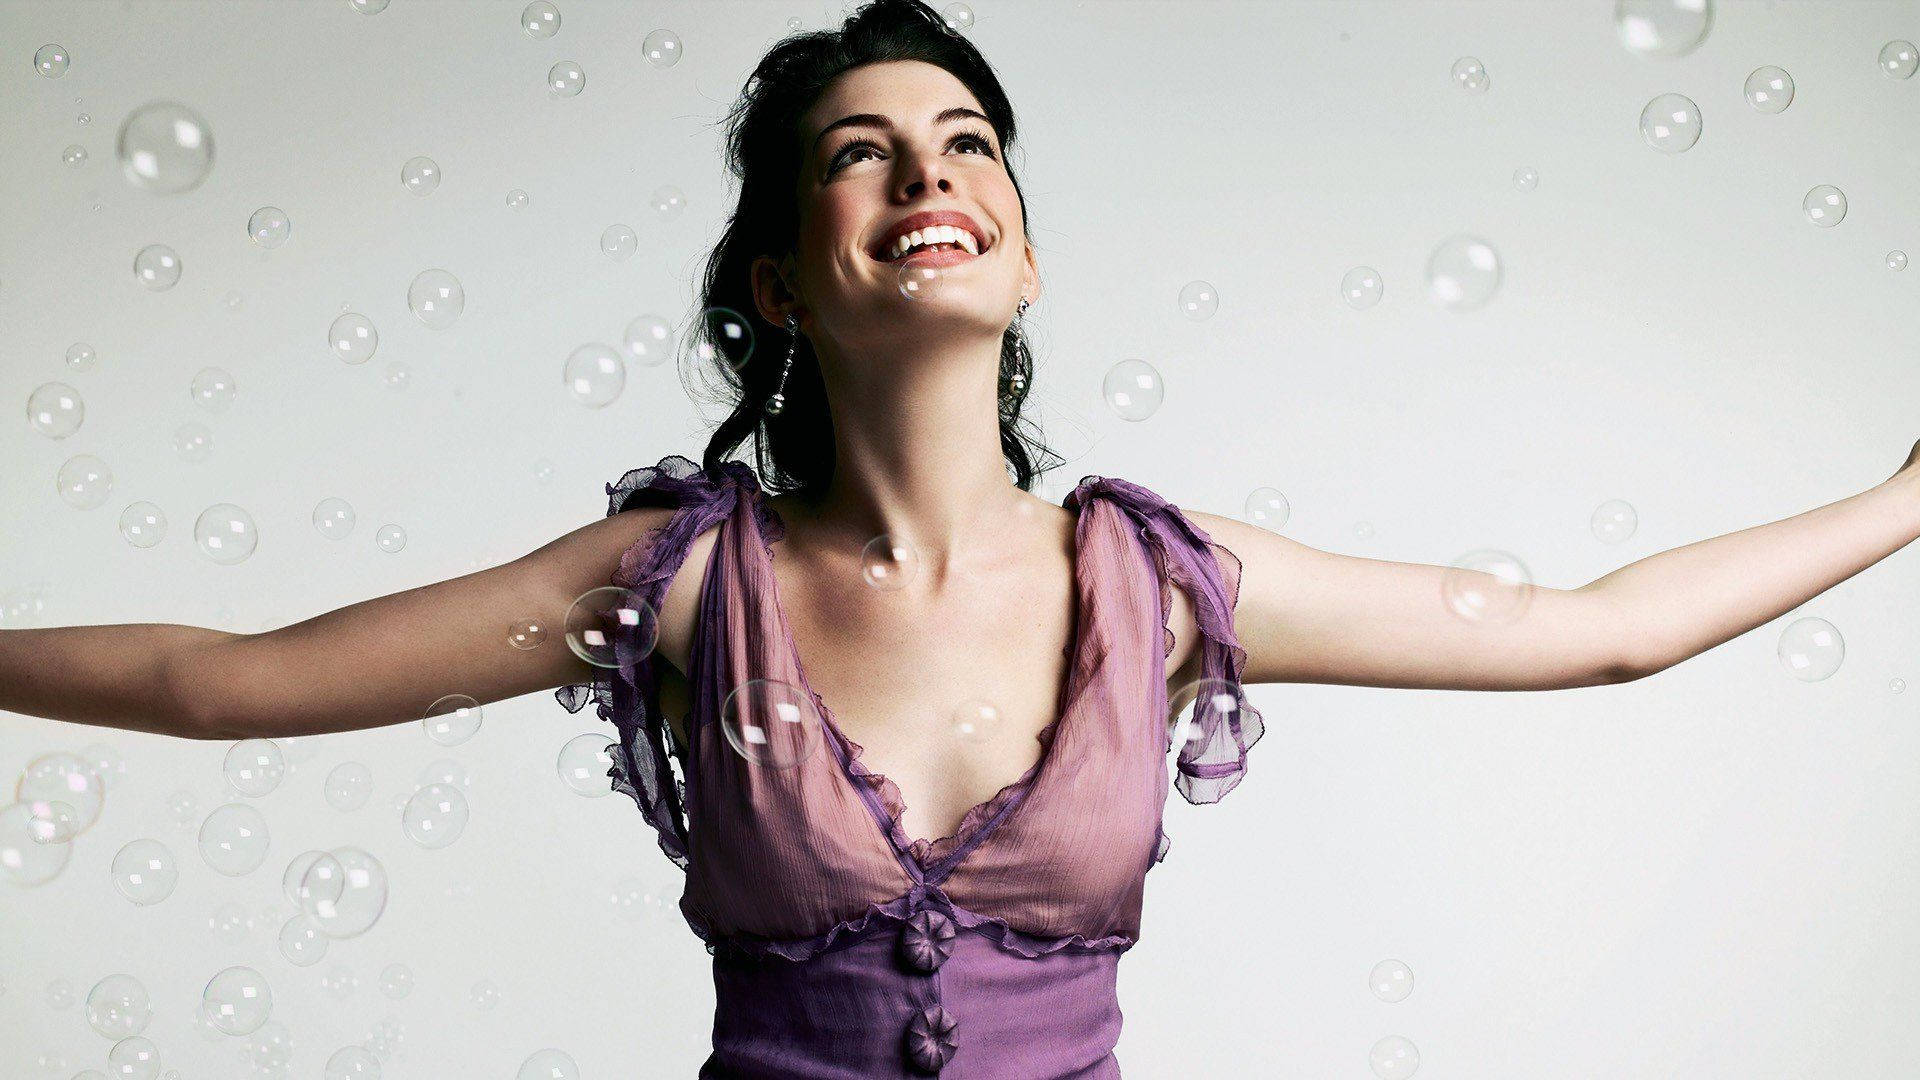 Feeling Liberated, Anne Hathaway Celebrates Her Newfound Freedom. Background